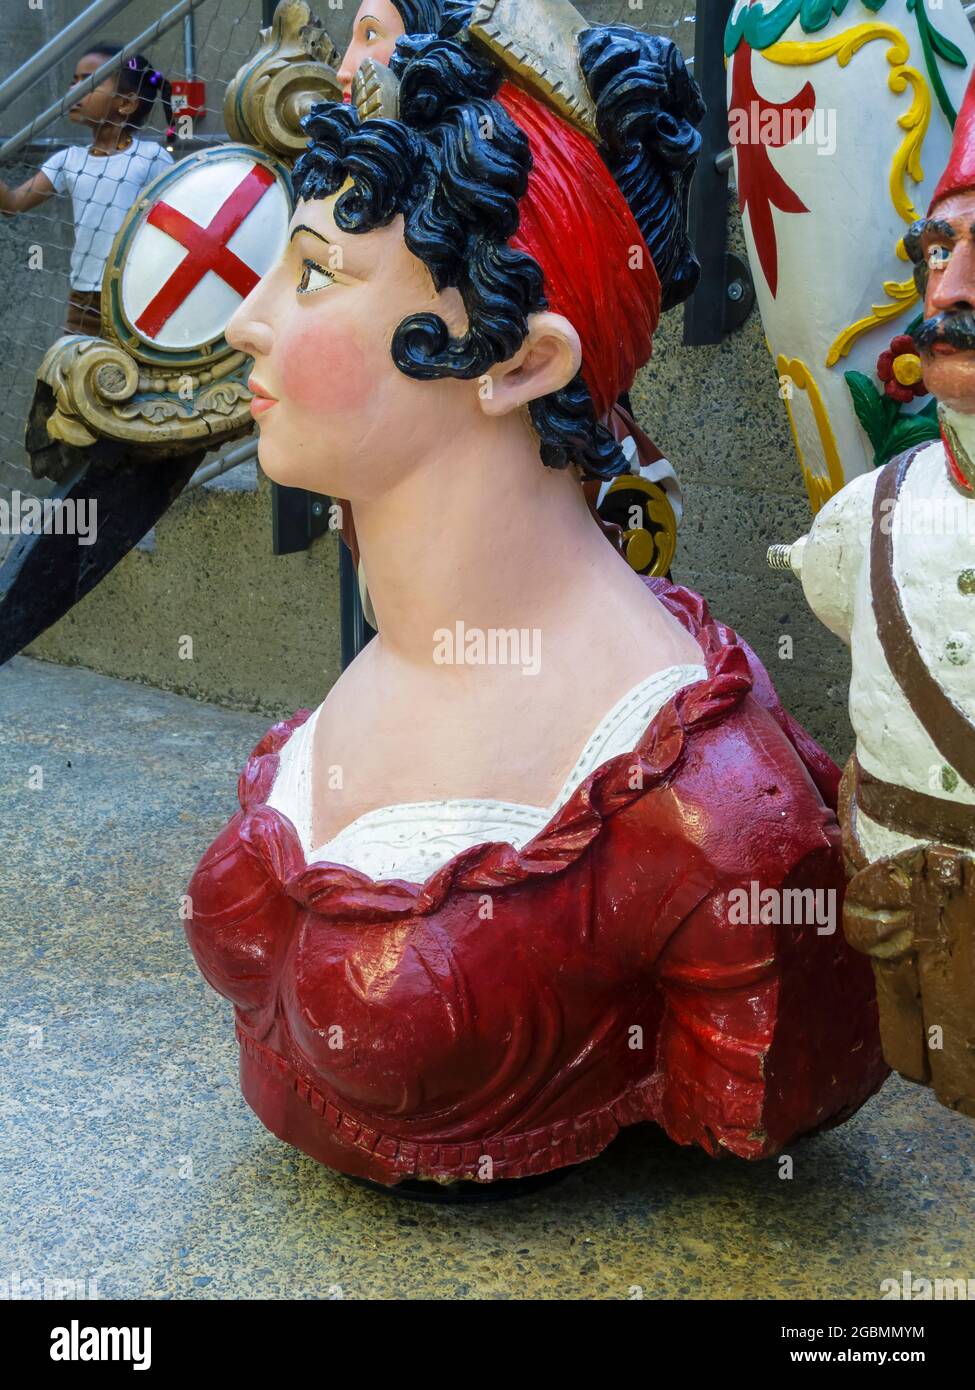 Display Of Traditional Figureheads In The Cutty Sark A British Clipper Ship And Popular Tourist